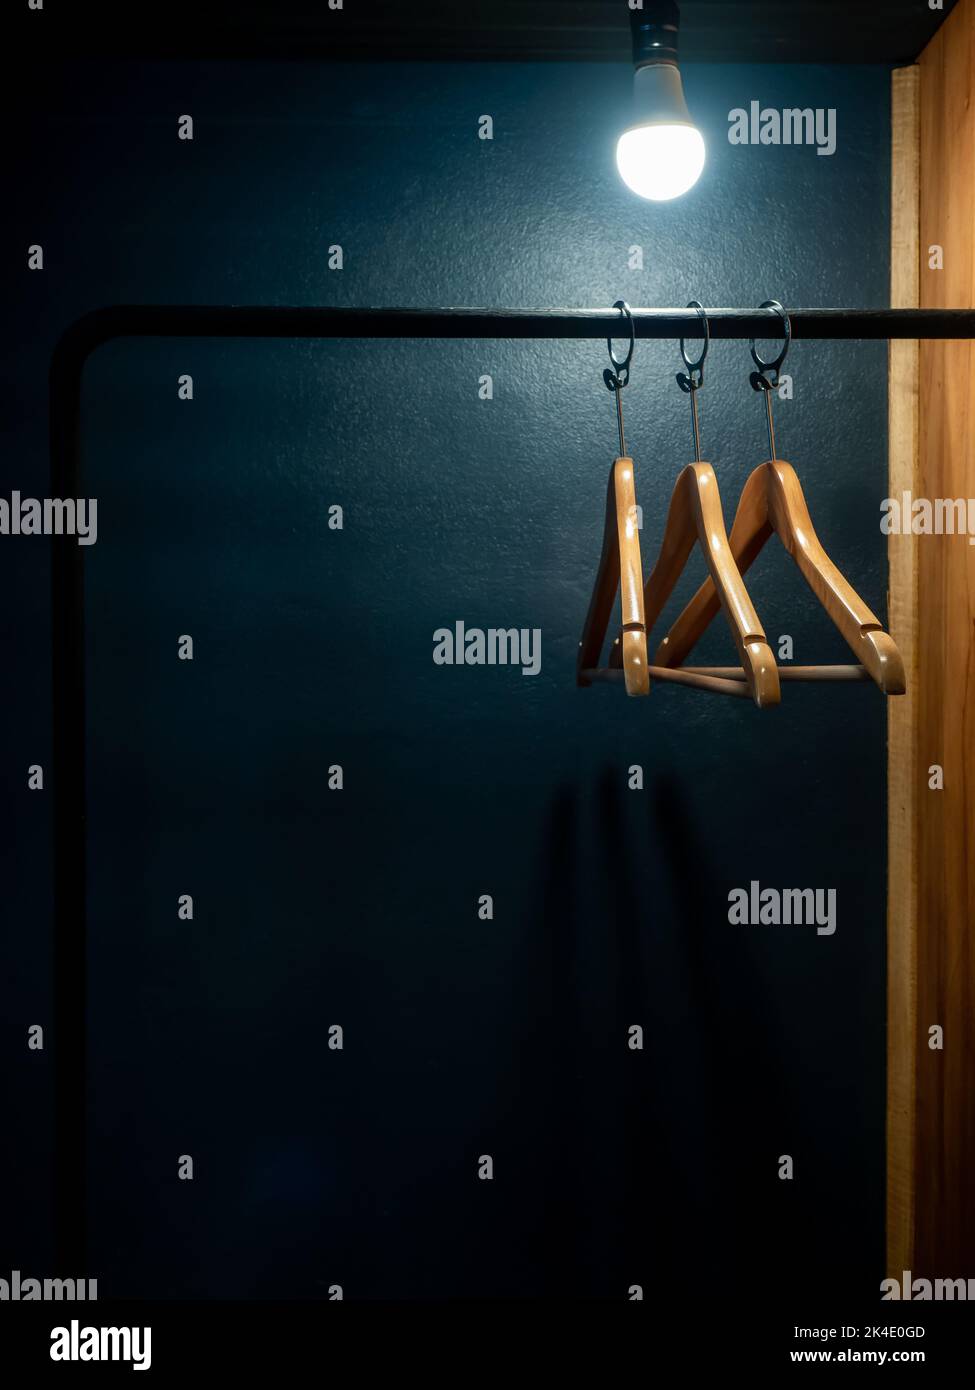 Three empty wooden clothes hangers without shirts or dress hanging on a black cloth rack with light bulb in the wood wardrobe on dark blue background Stock Photo